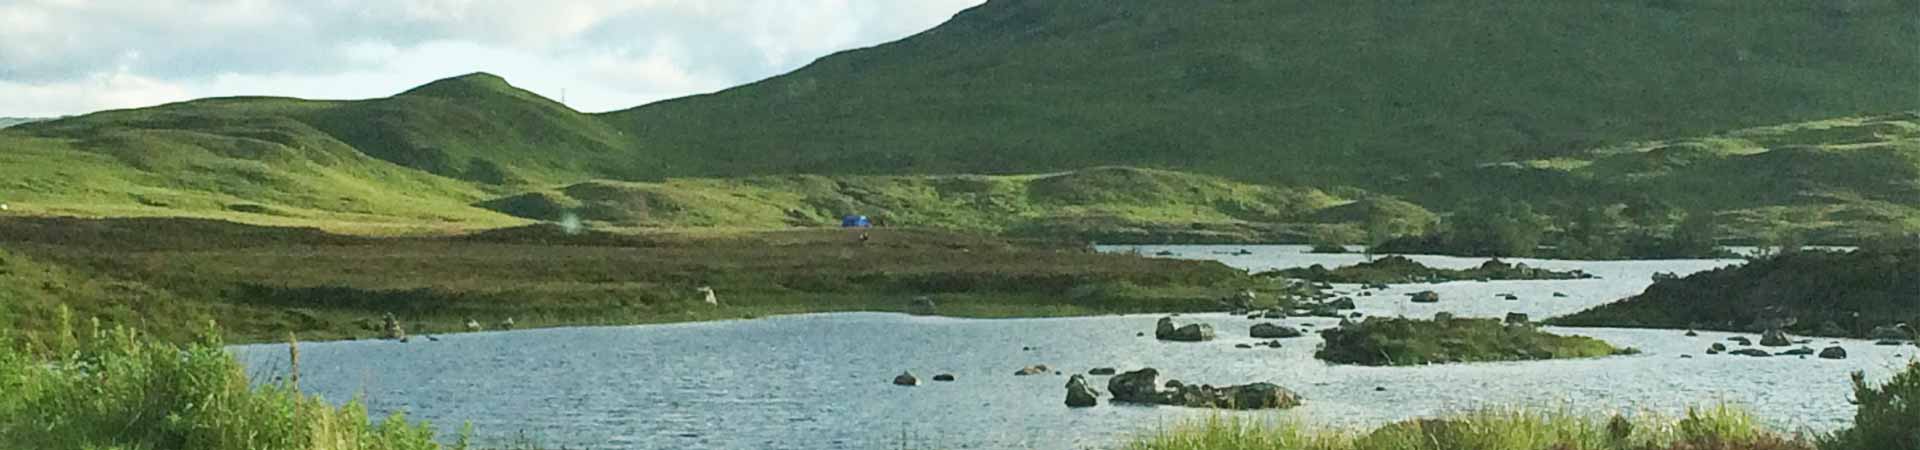 Photo shows areas of peatland between Glencoe and Bridge of Orchy in central Scotland.